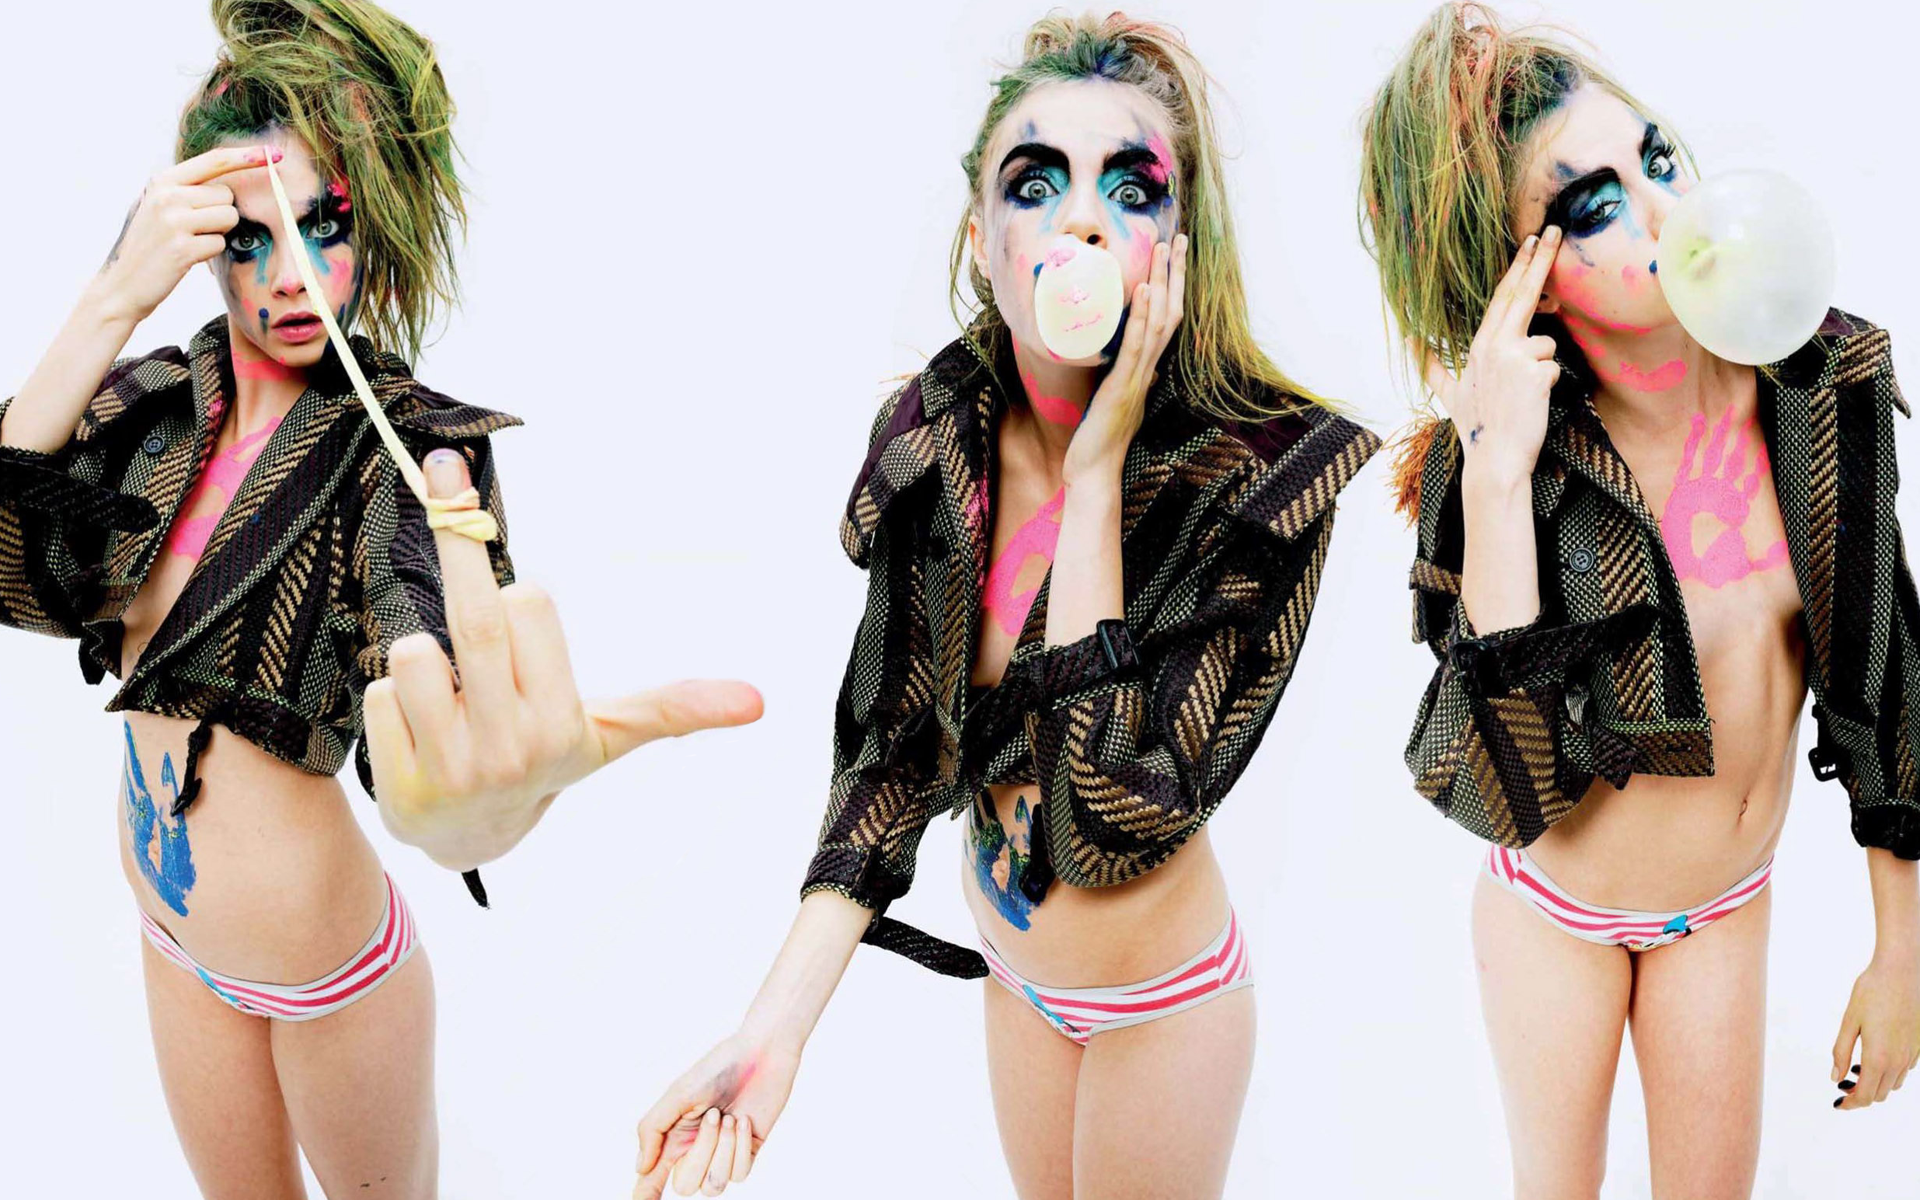 People 1920x1200 Cara Delevingne standing women model actress women indoors indoors simple background white background obscene middle finger finger gun face paint food striped panties panties multi-colored hair